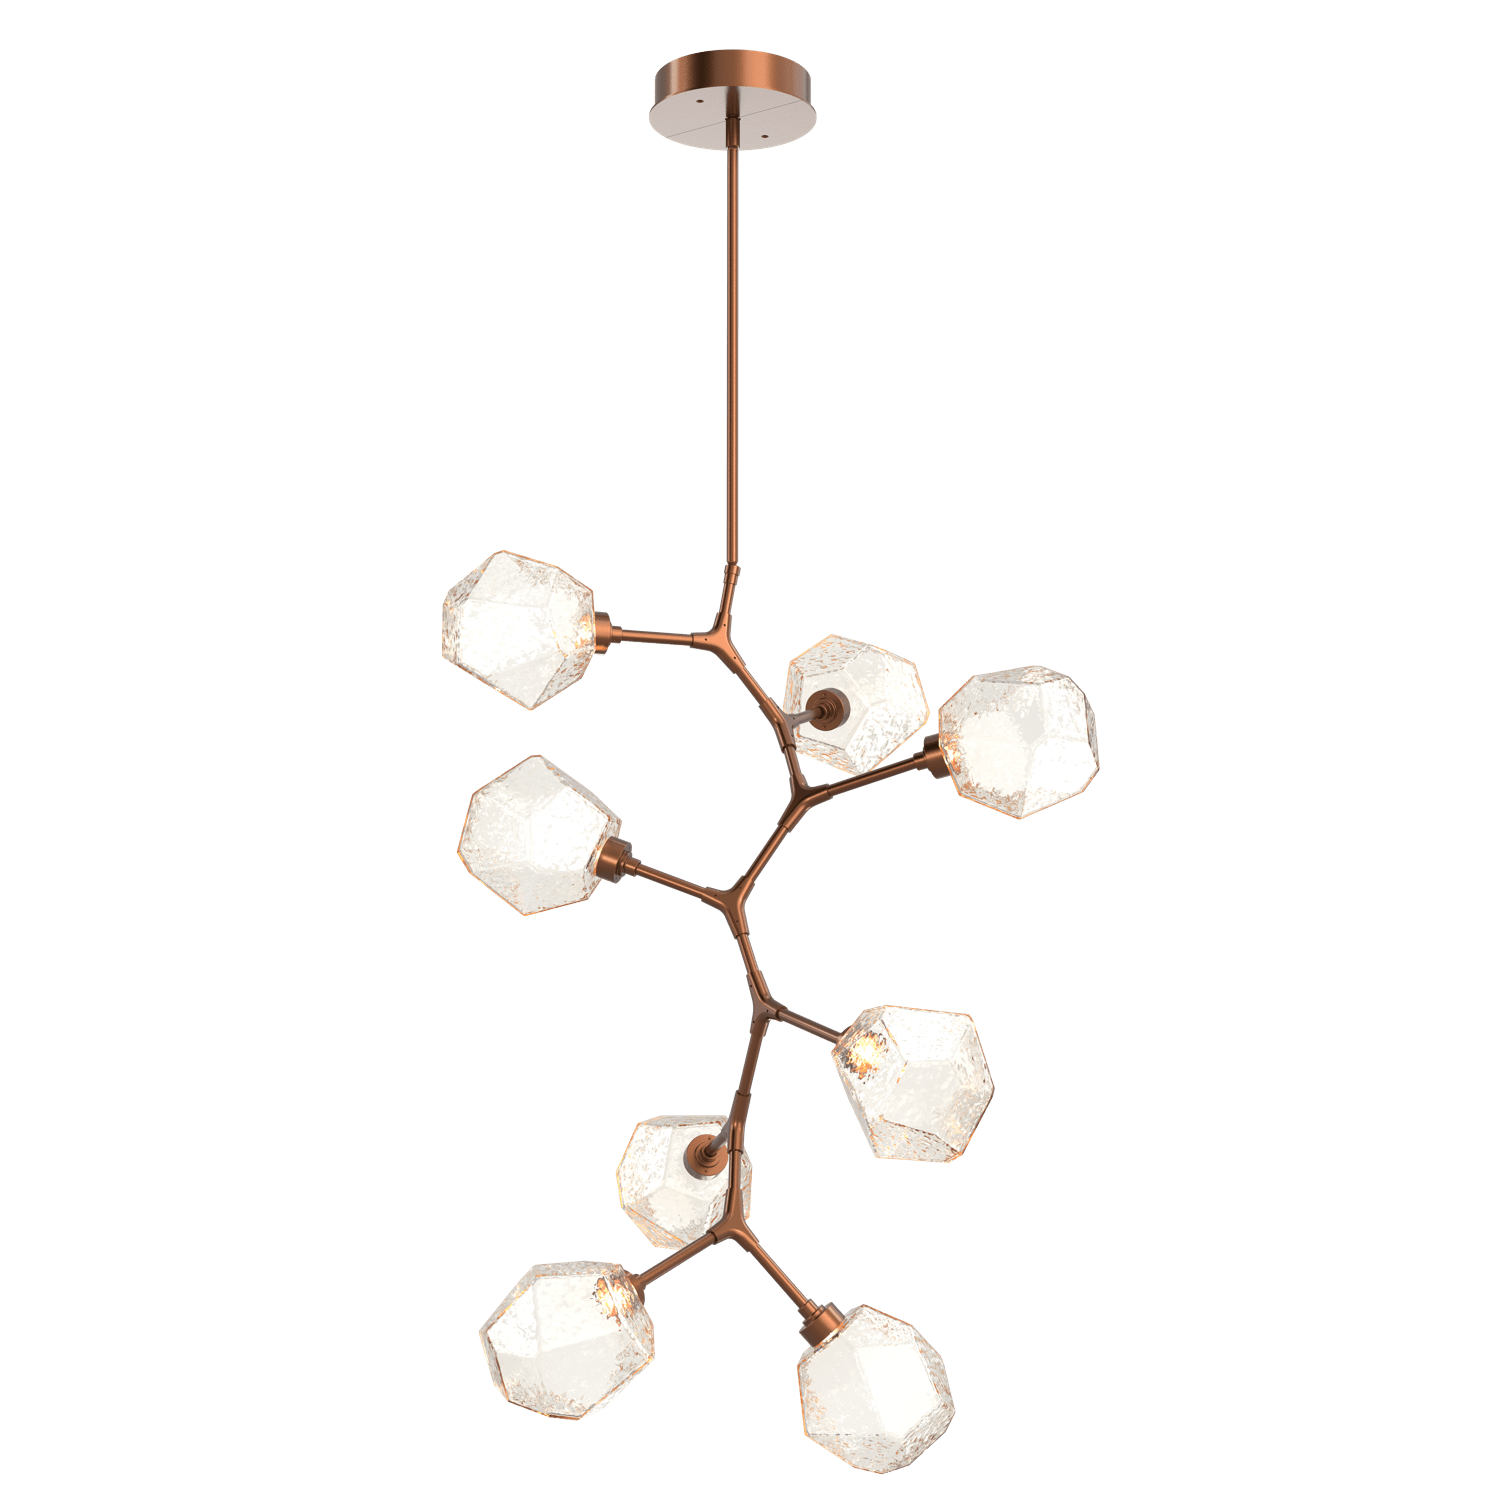 CHB0039-VB-BB-A-Hammerton-Studio-Gem-8-light-modern-vine-chandelier-with-burnished-bronze-finish-and-amber-blown-glass-shades-and-LED-lamping